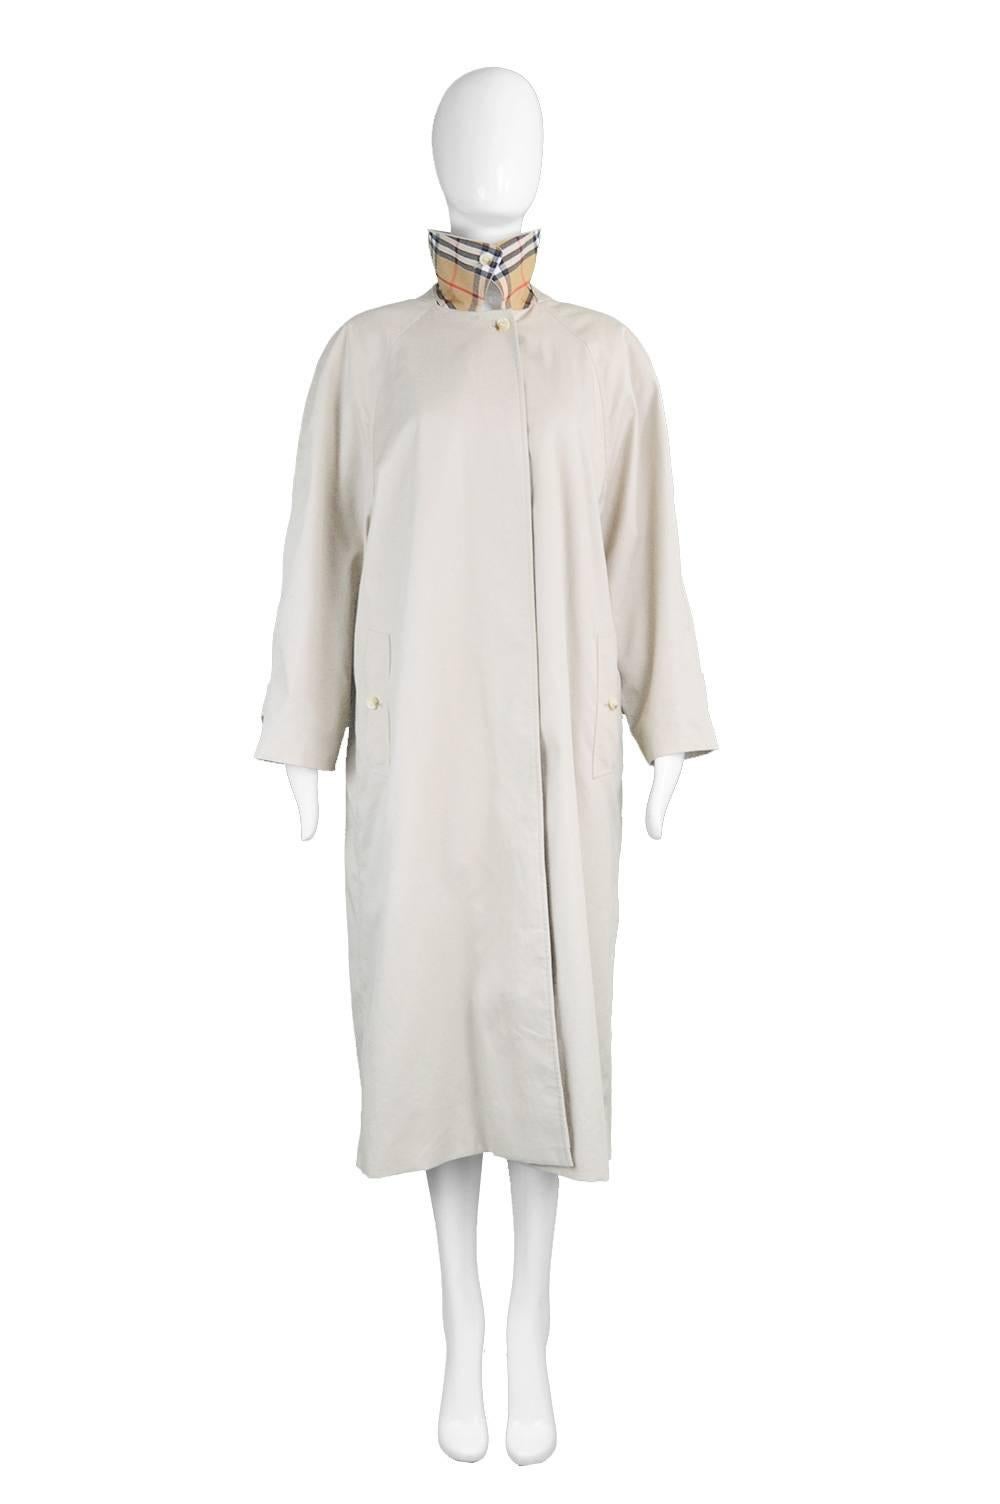 A chic and classic vintage women's mac/ mackintosh coat from the 1980s by Burberrys before they dropped the 's' in 1998 and became Burberry. With a loose, swing style fit that gives a truly elegant silhouette, a fly front button placket and a collar